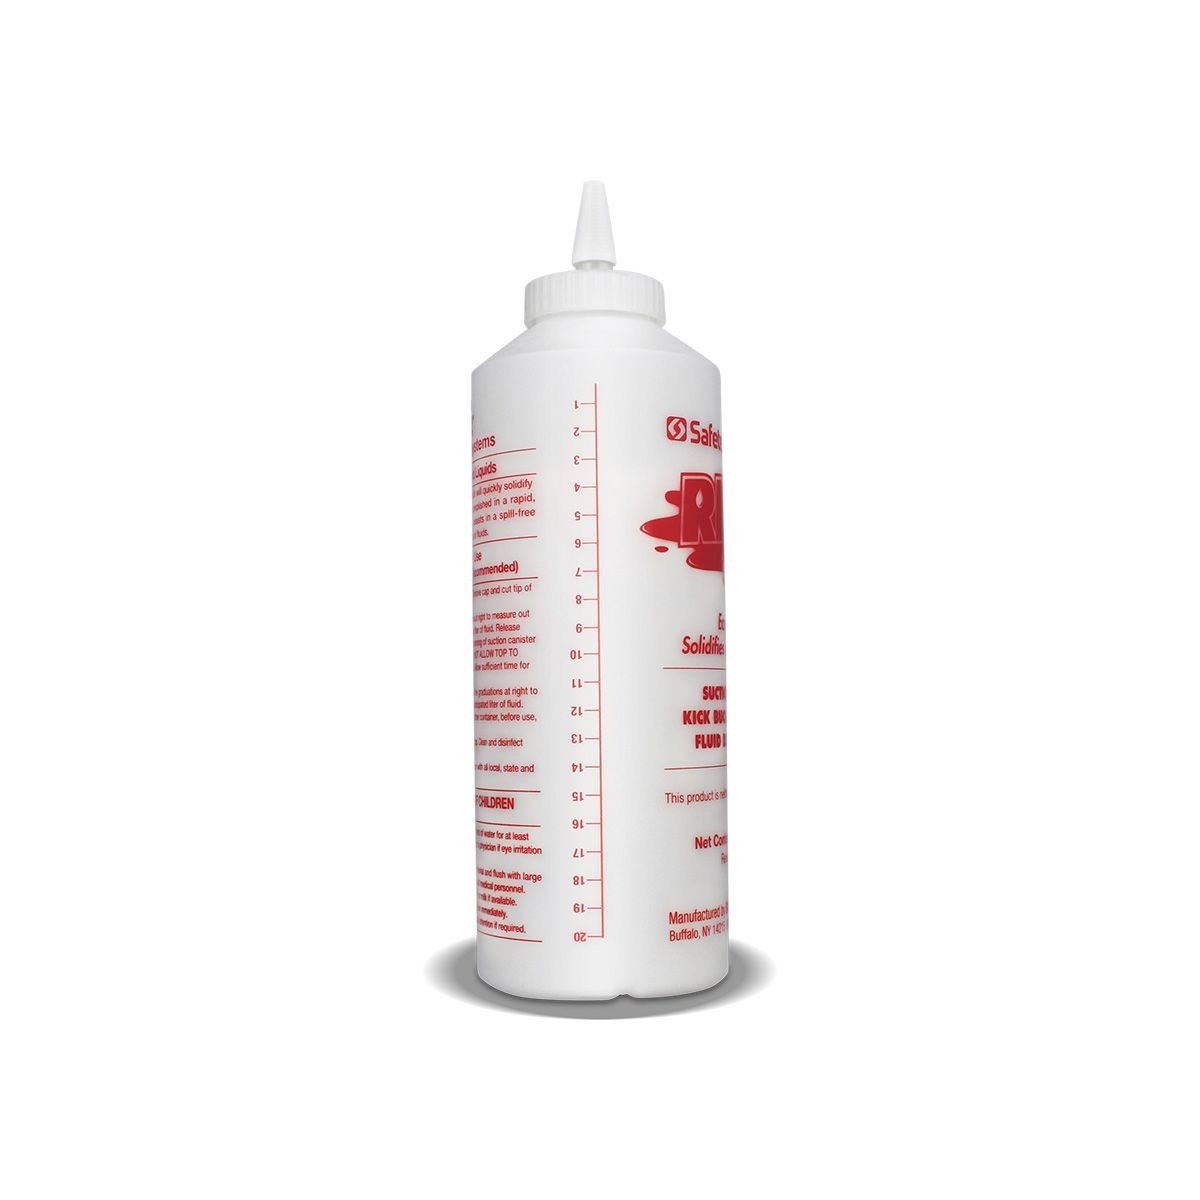 Red Z® Spill Control Solidifier Single/Multi-Use Bottles - Infection and Spill Control